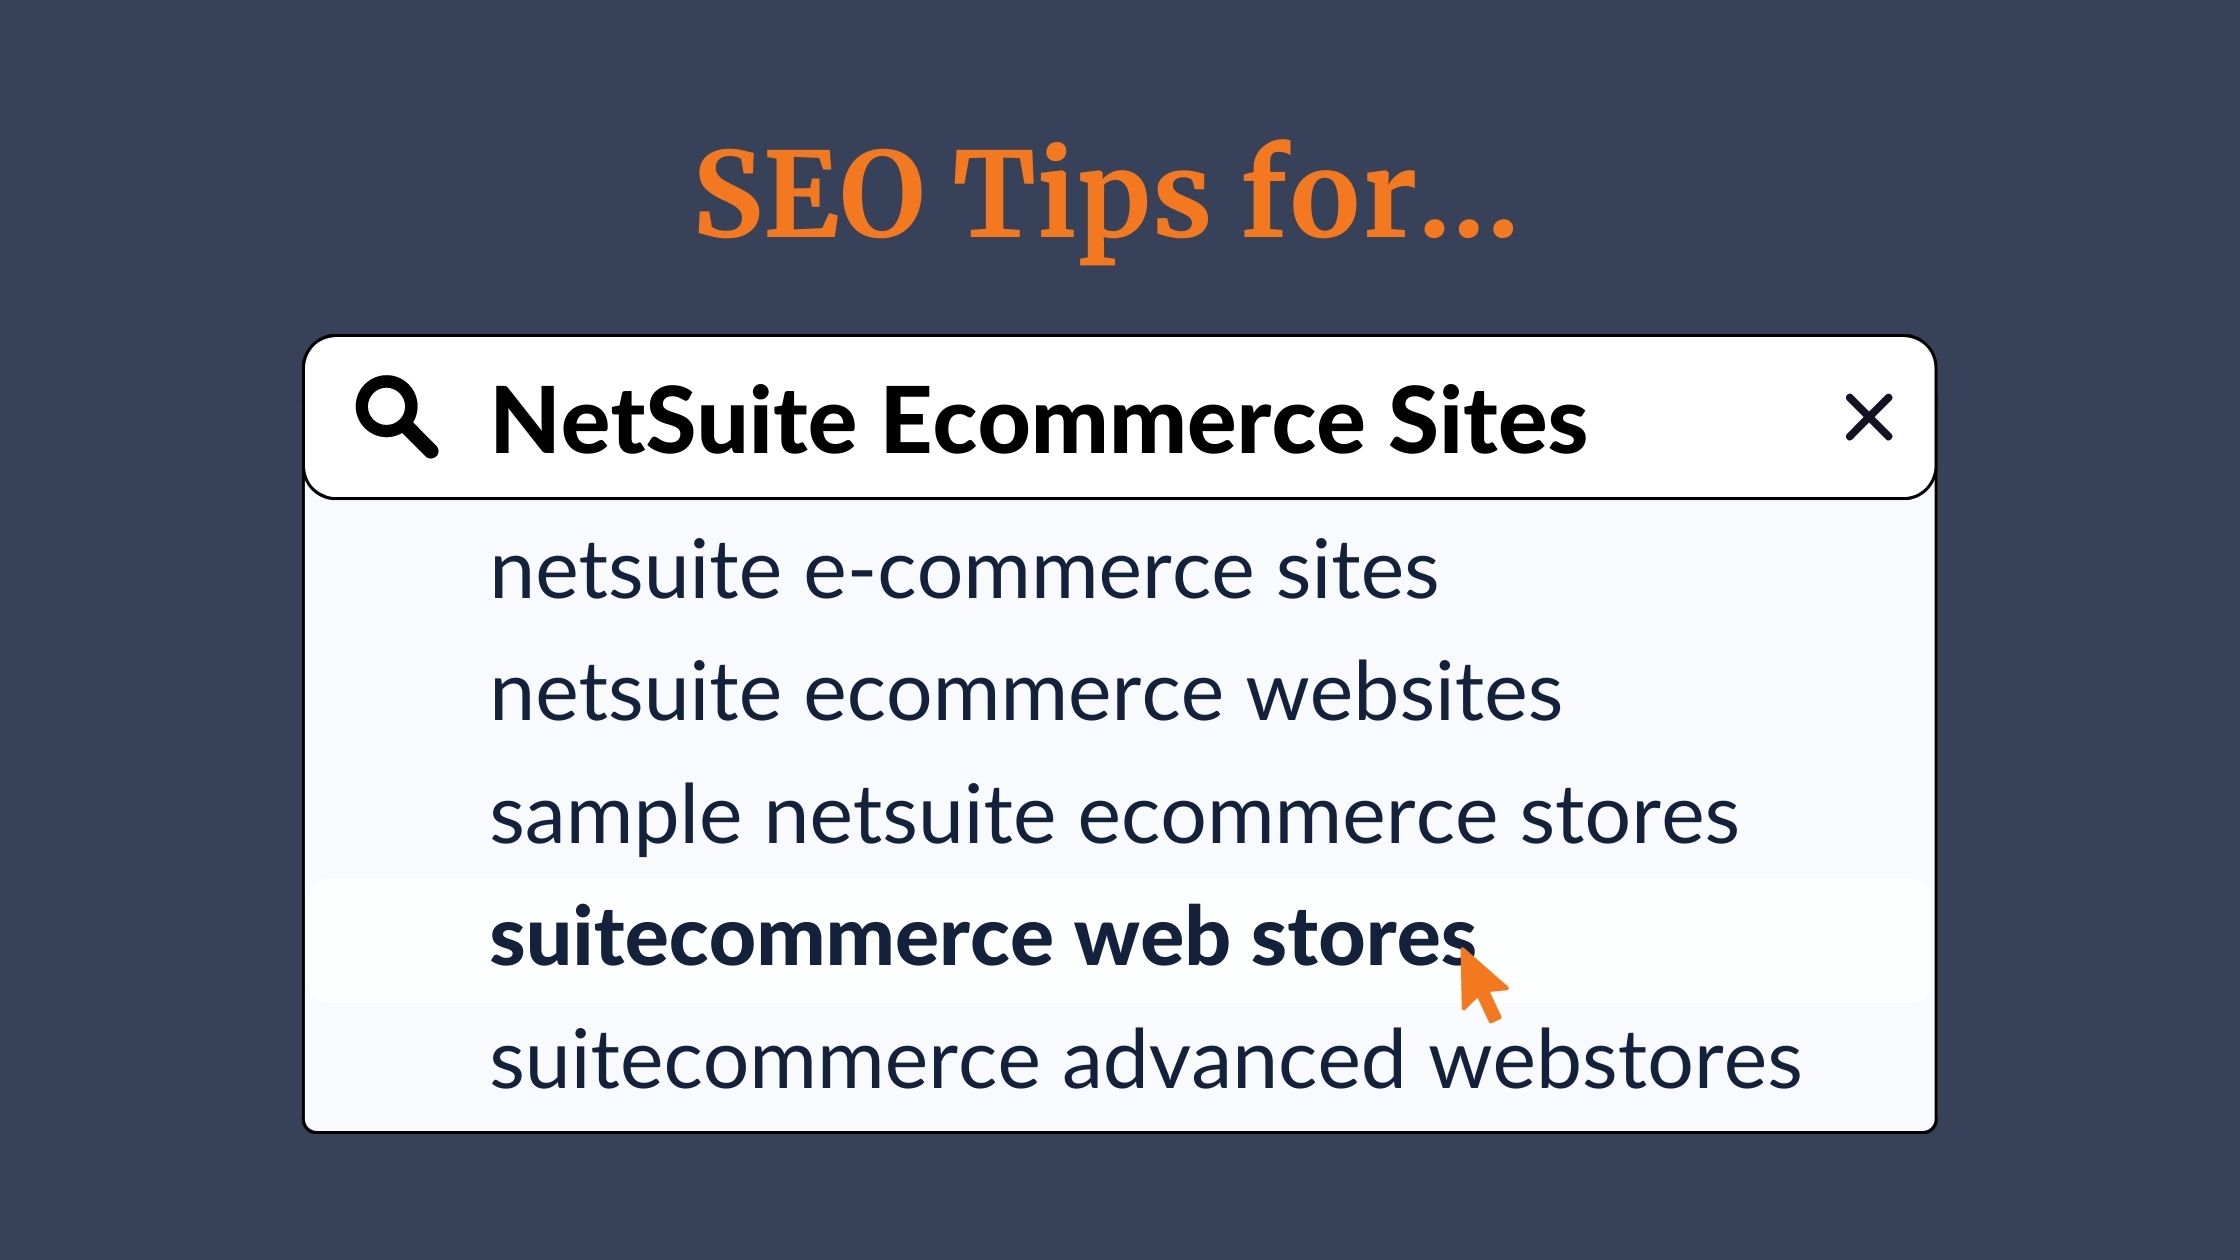 SEO Tips for NetSuite Ecommerce Sites | Anchor Group